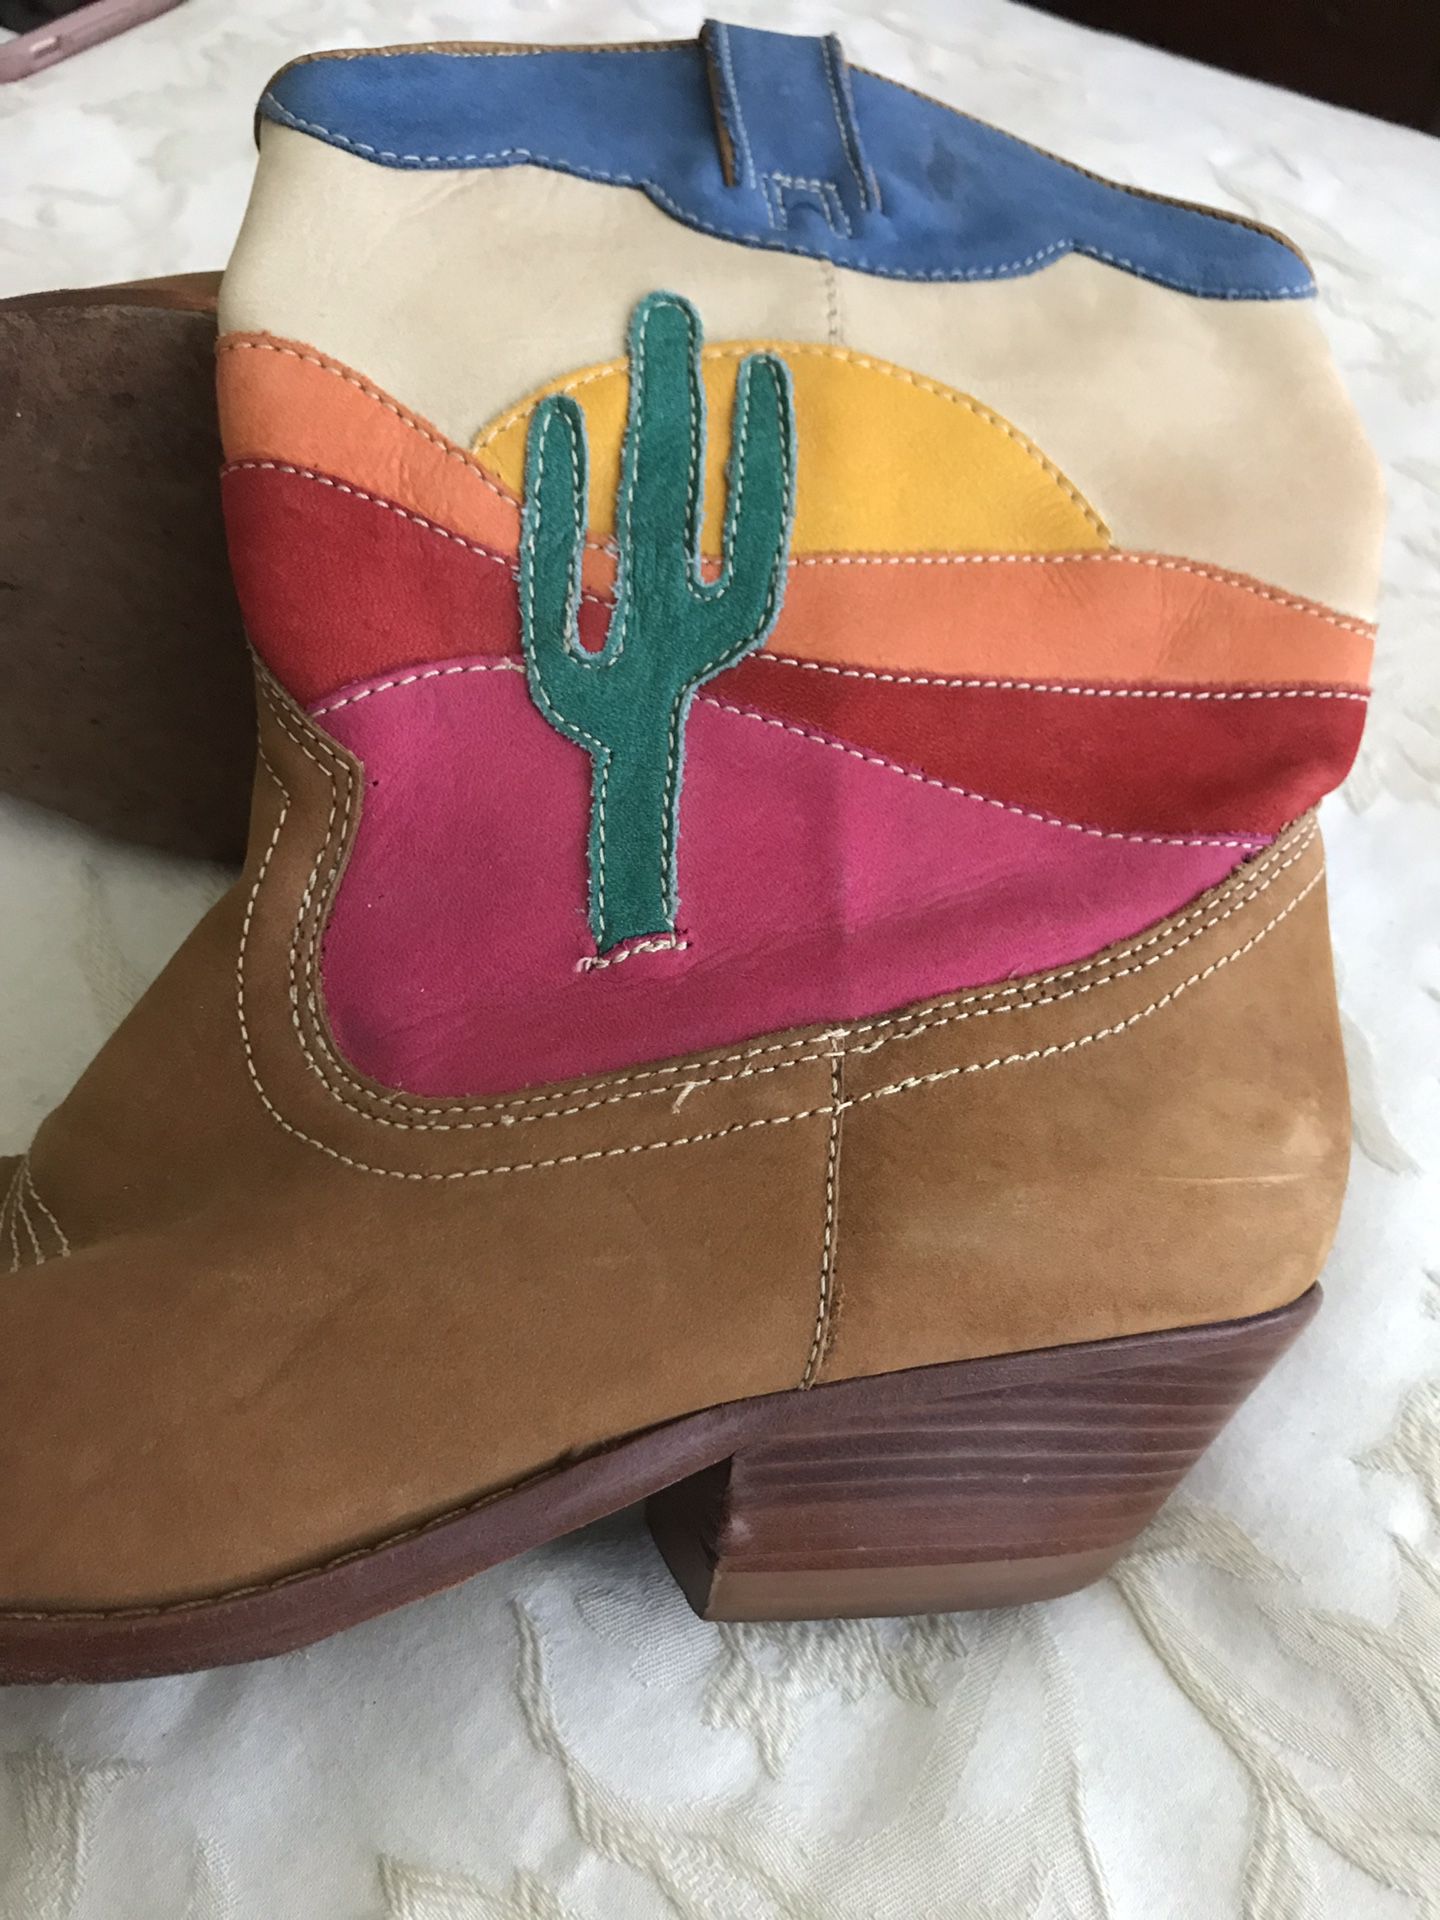 Nordstrom cowgirl boots 9 Med